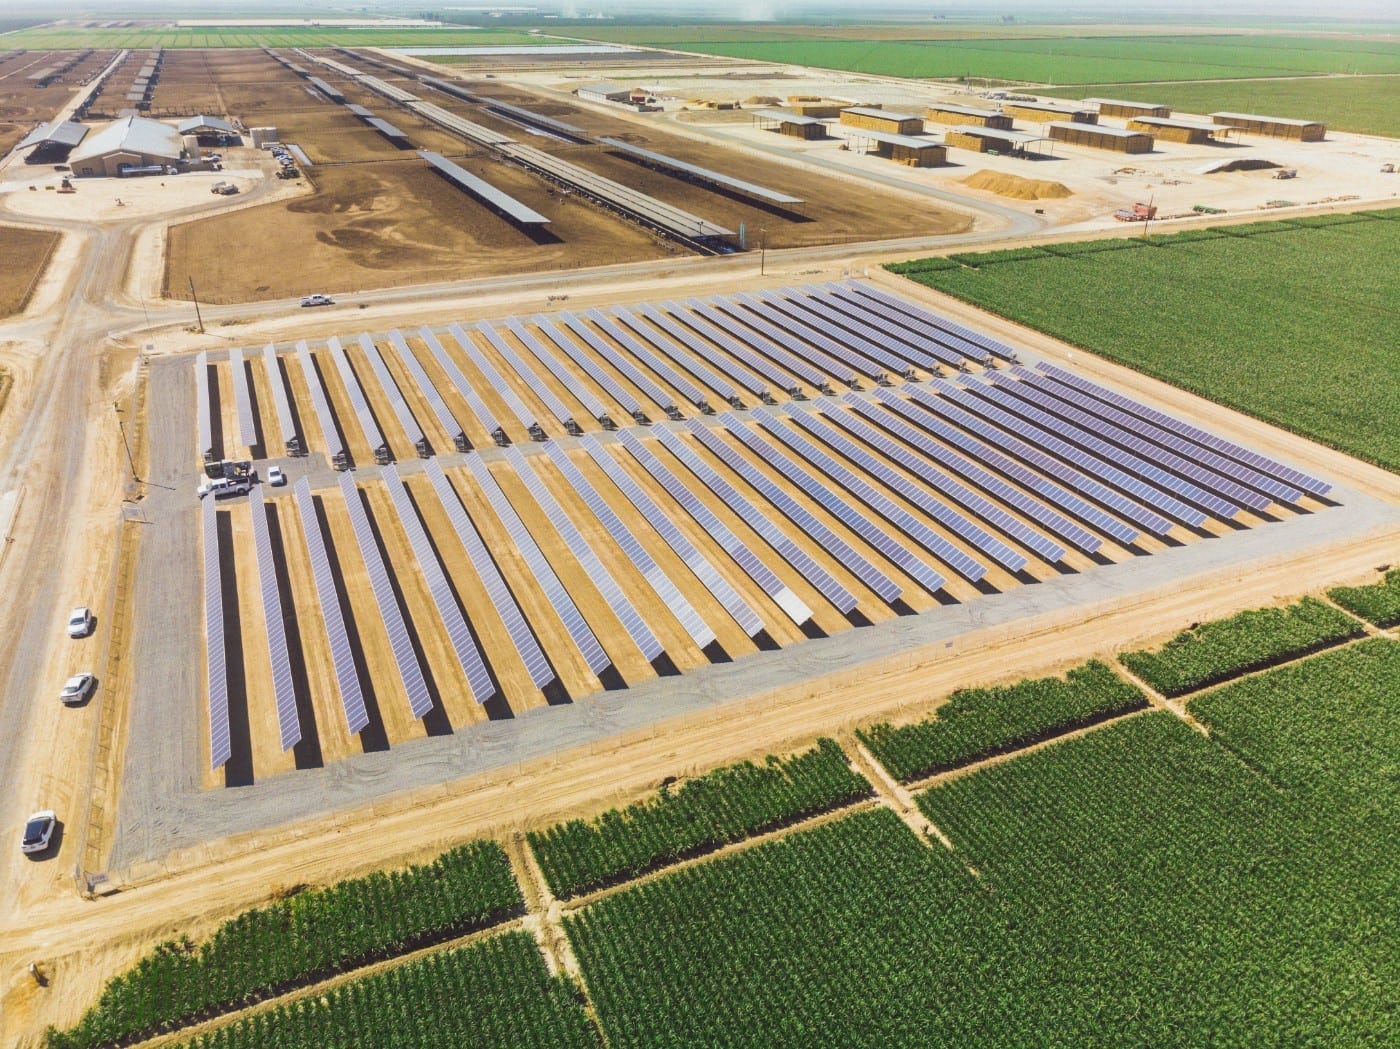 Aerial view of large ground-mounted solar panel installation at John Scheenstra Dairy surrounded by livestock pens, hay bales and green pastures in Wasco, California.